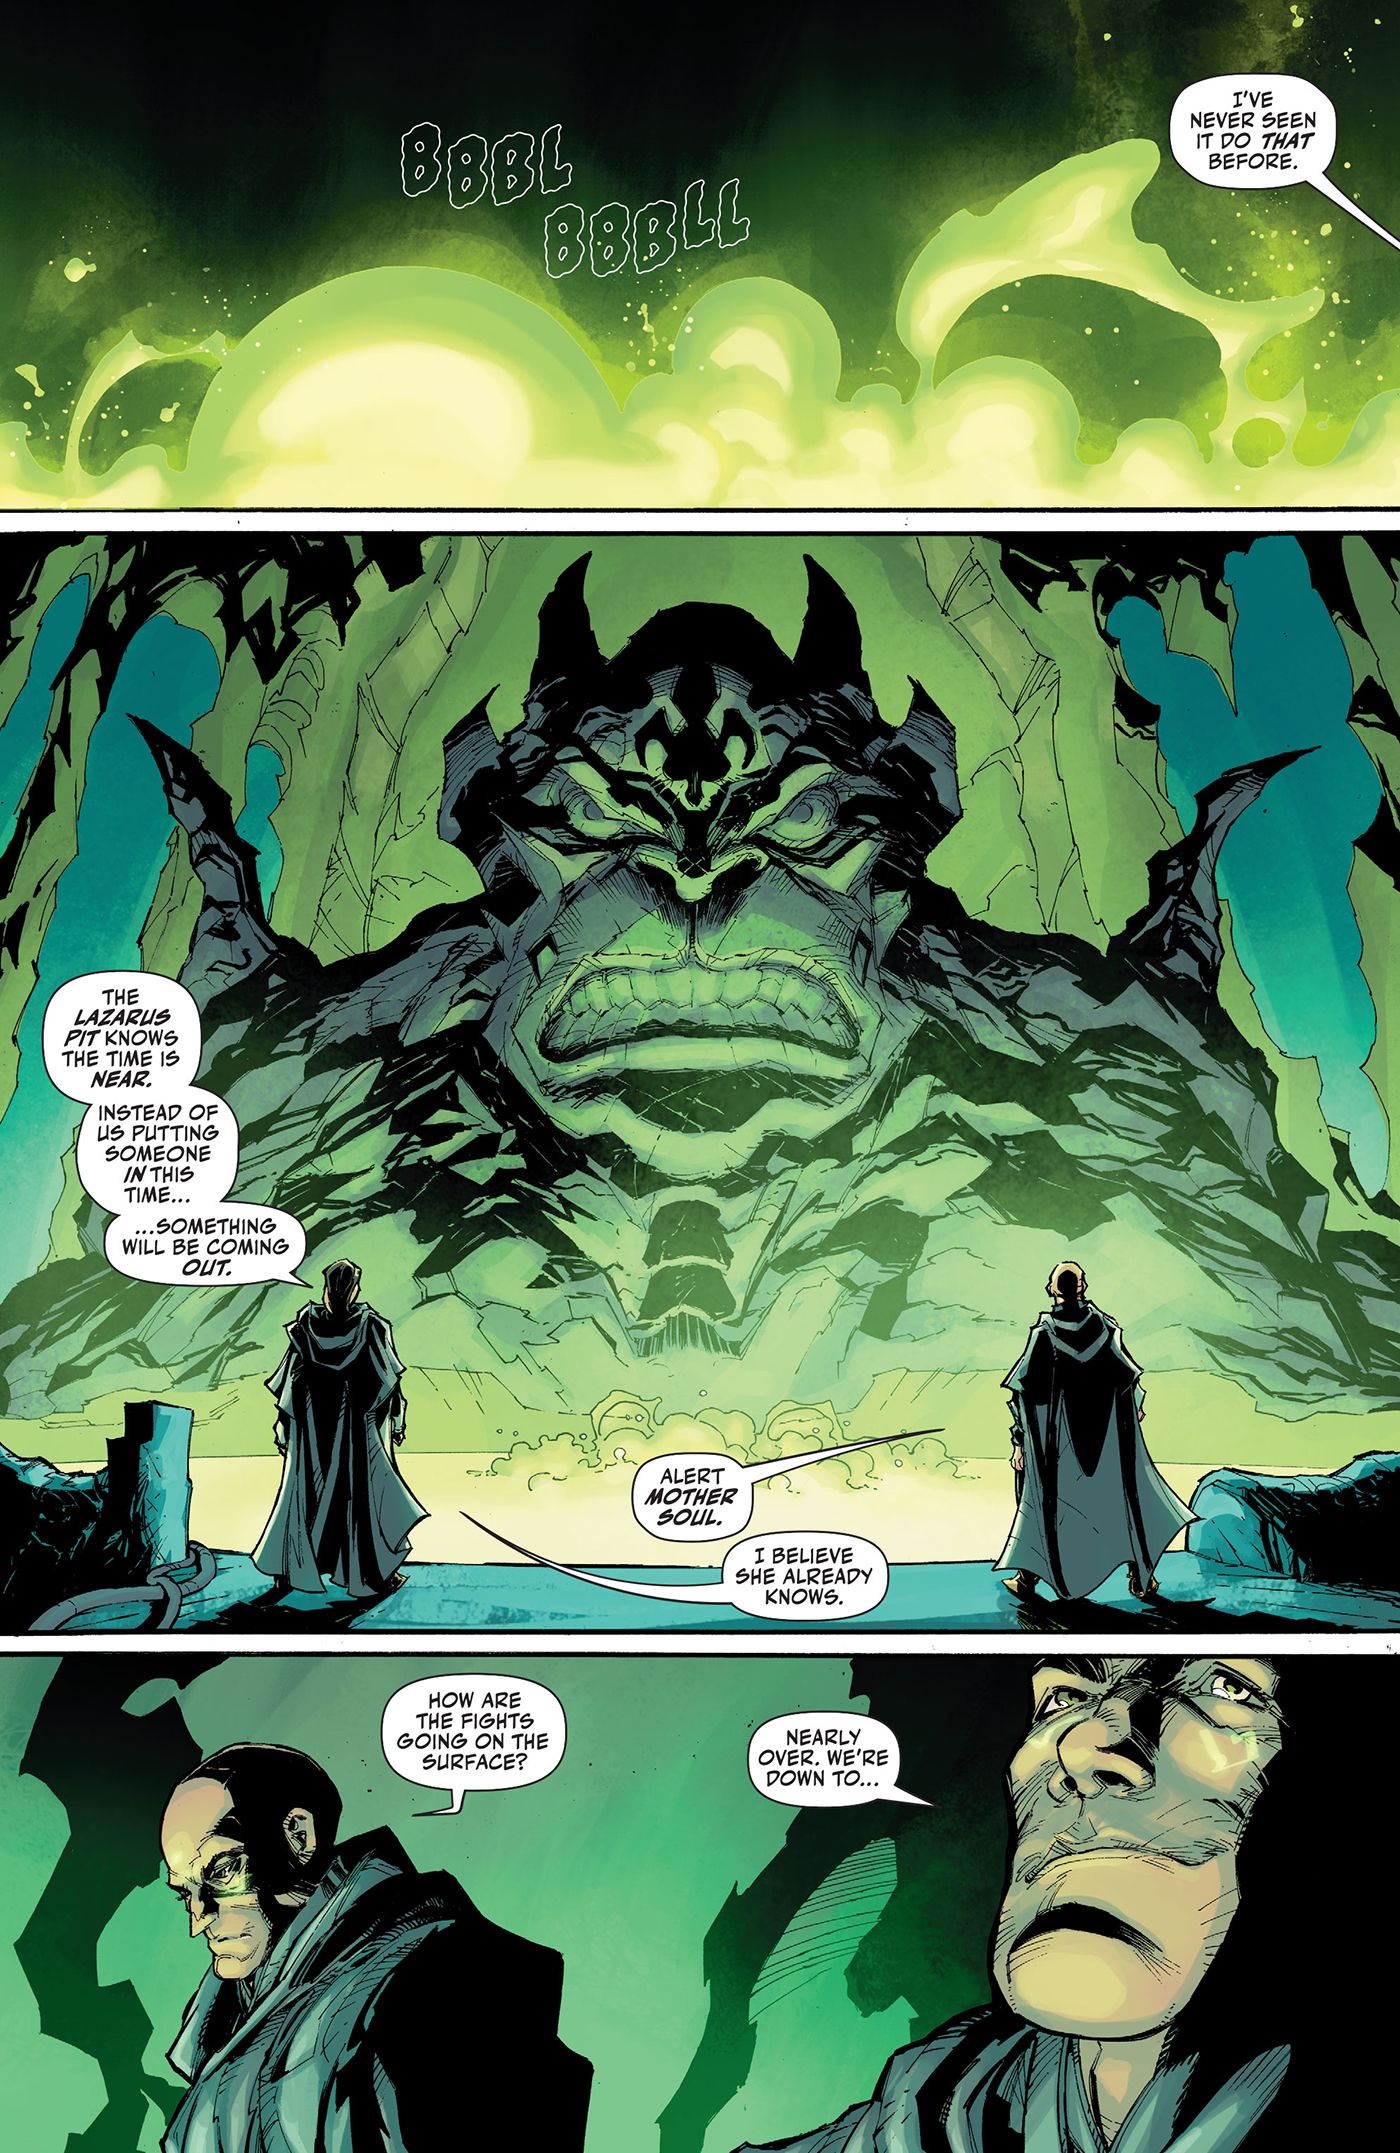 The League of Lazarus await something that may emerge from the Lazarus Pit.